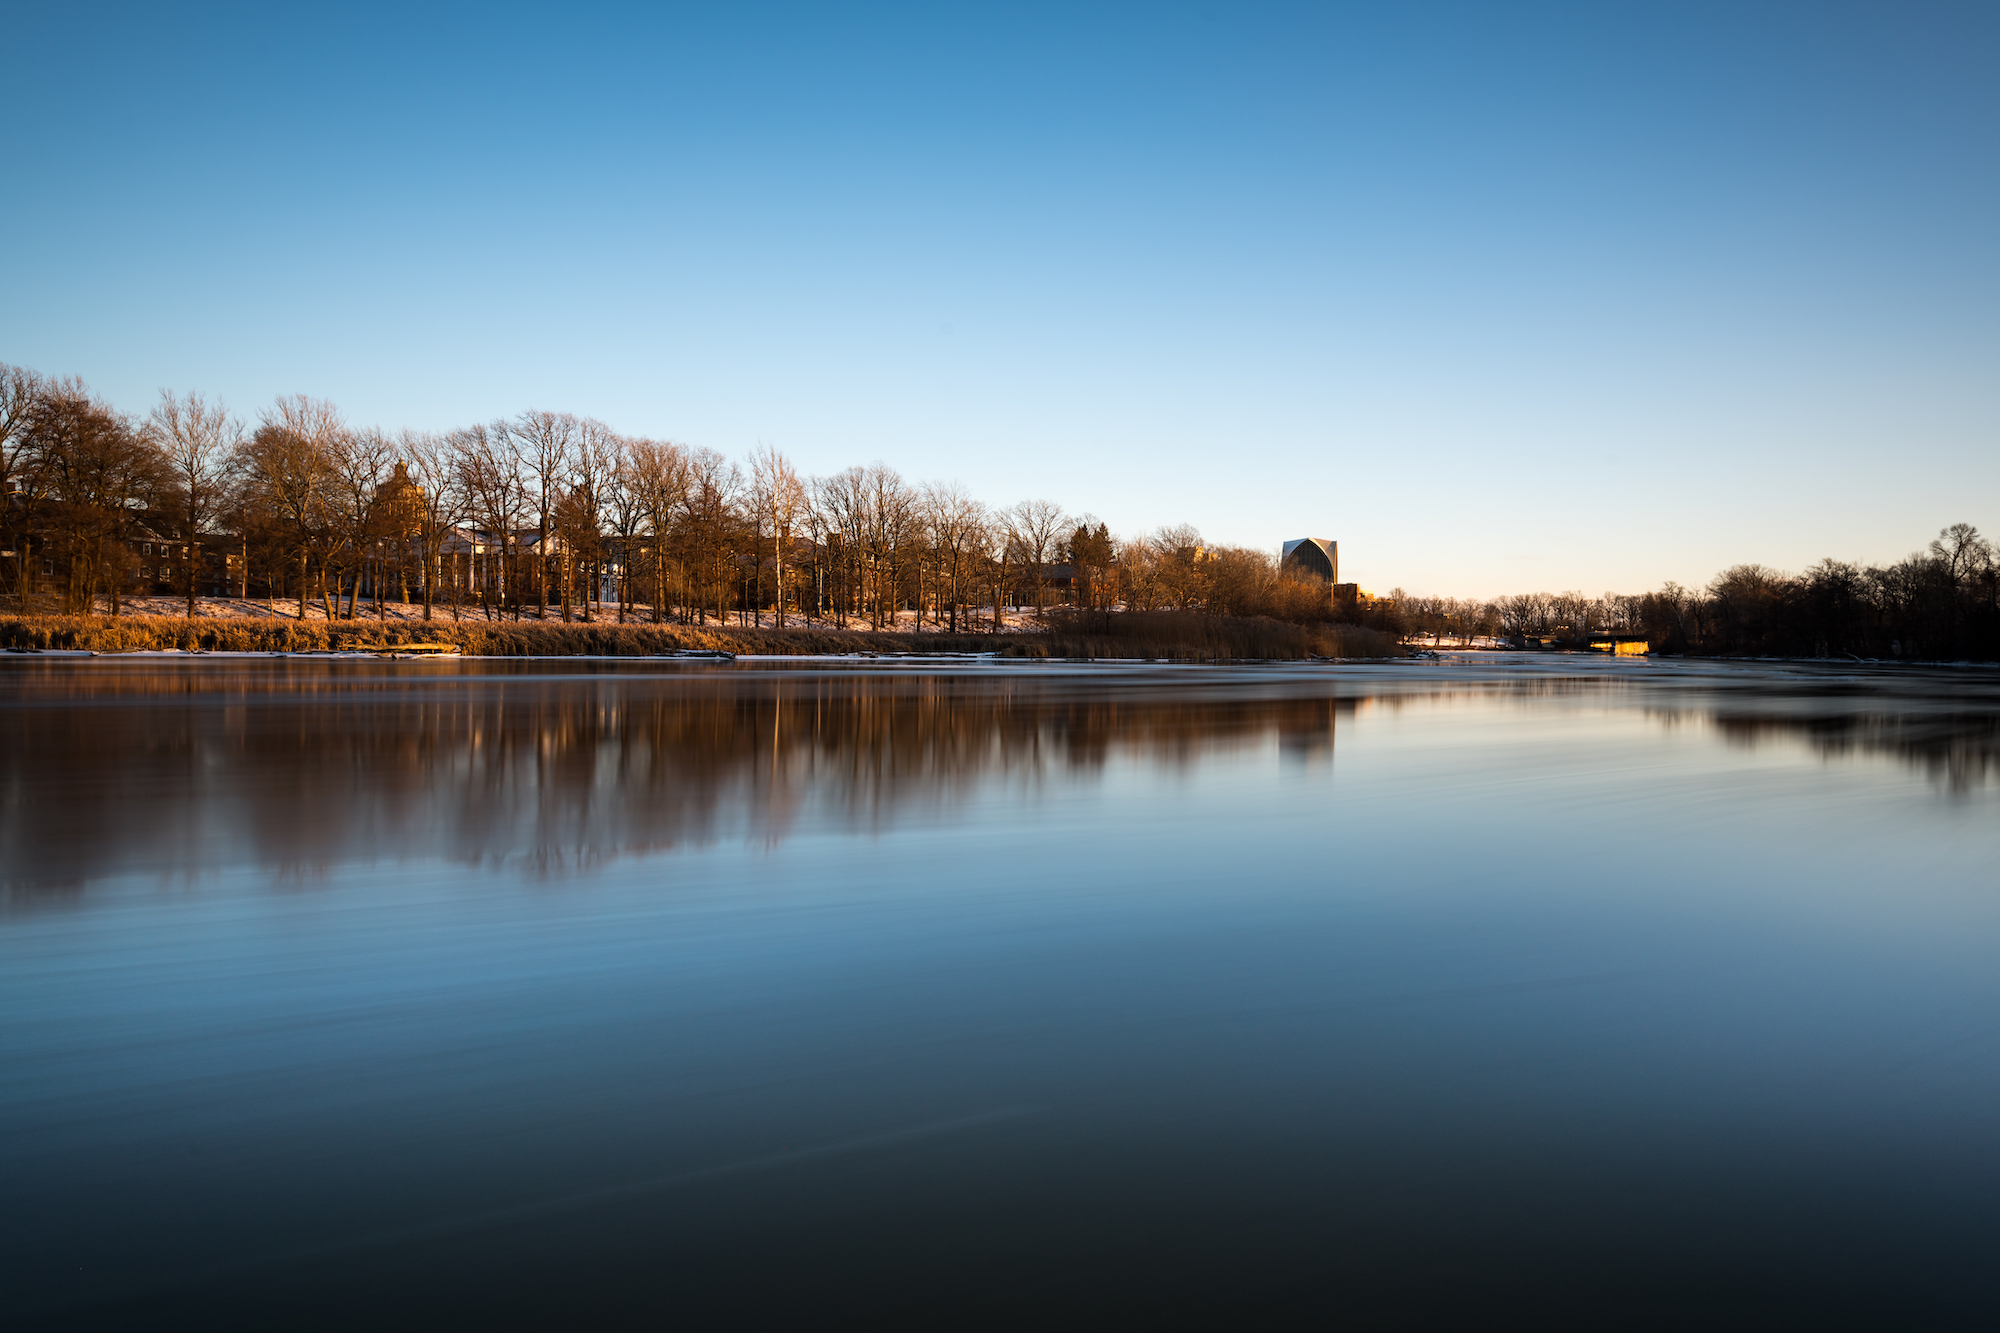 Ice floes float past University of Rochester’s River Campus along the Genesee River during a long exposure at sunset